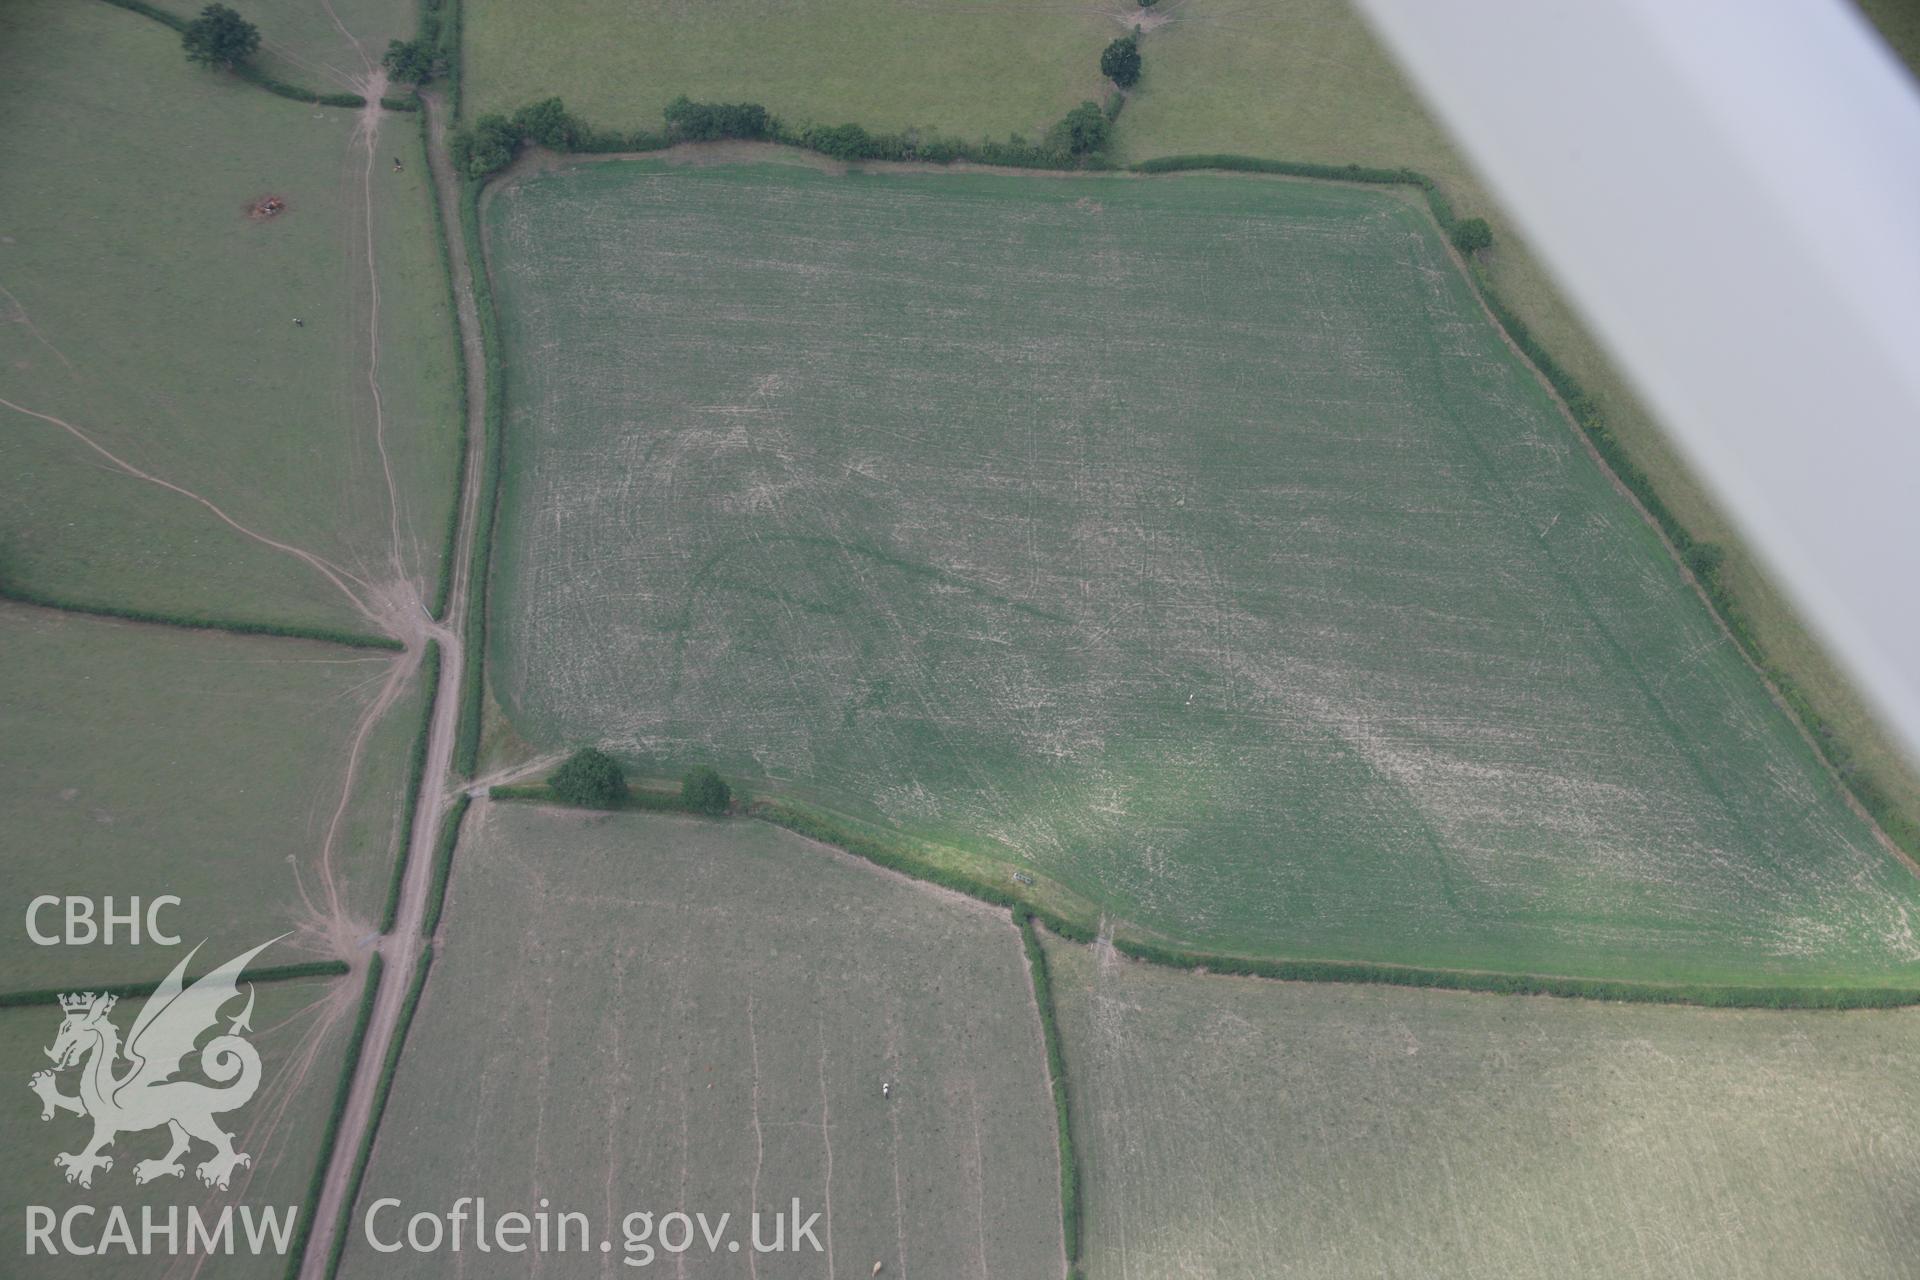 RCAHMW colour oblique aerial photograph of Ddolibod, showing non-archaeological cropmarks caused by spraying or harvesting patterns. Taken on 14 August 2006 by Toby Driver.